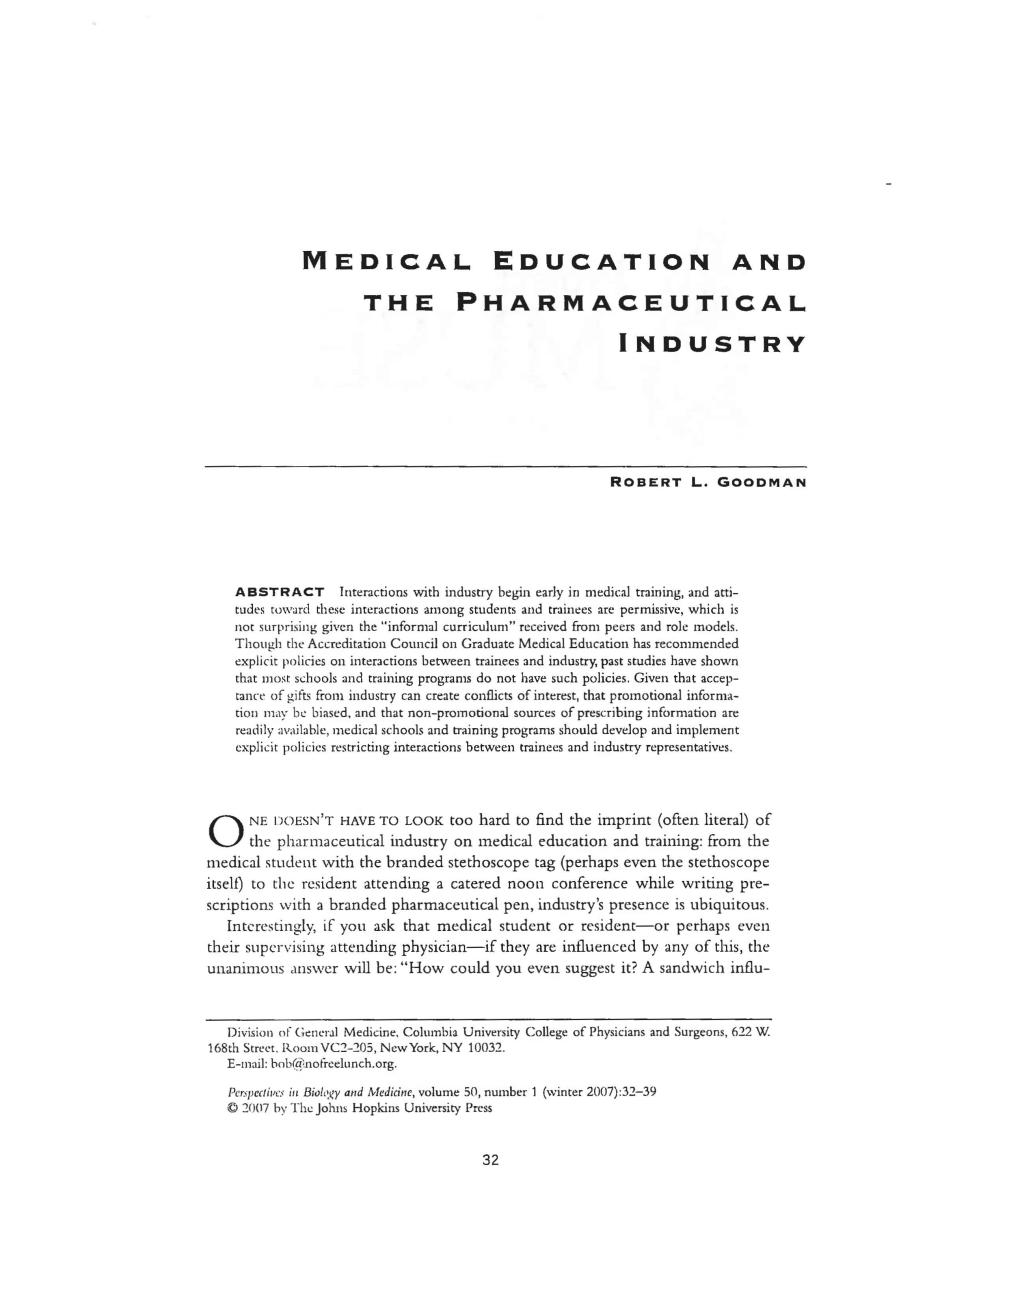 Medical Education and the Pharmaceutical Industry